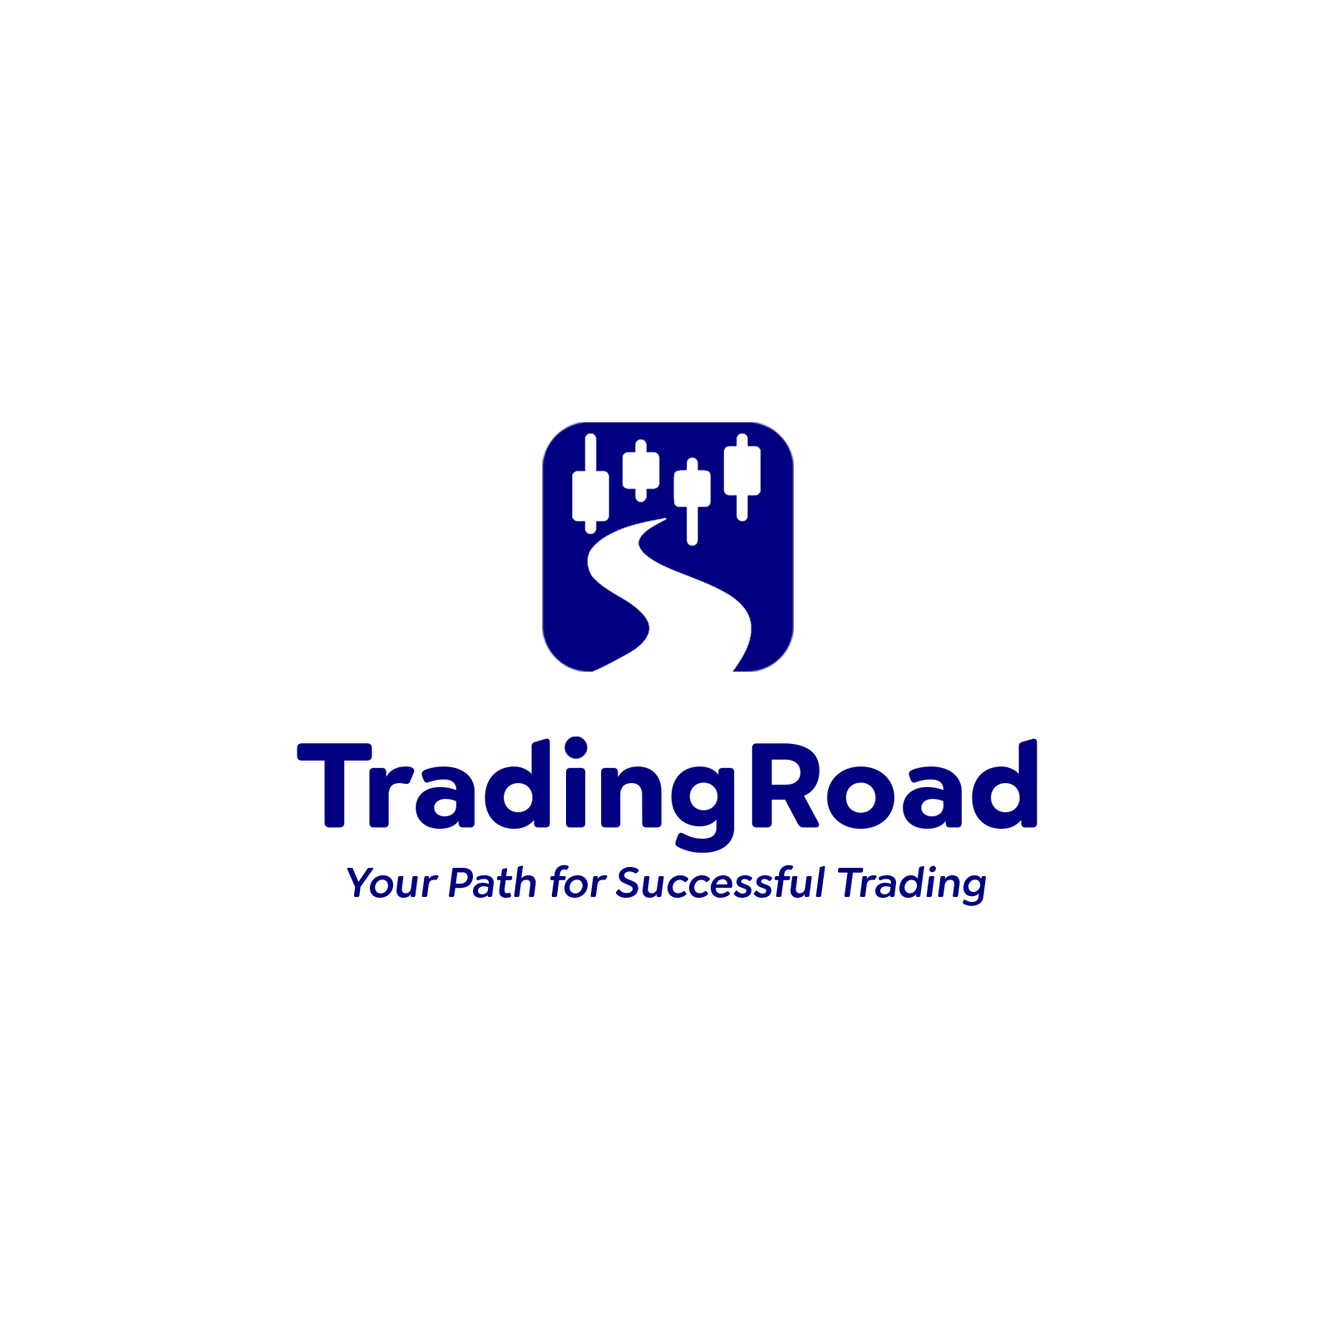 Trading Road